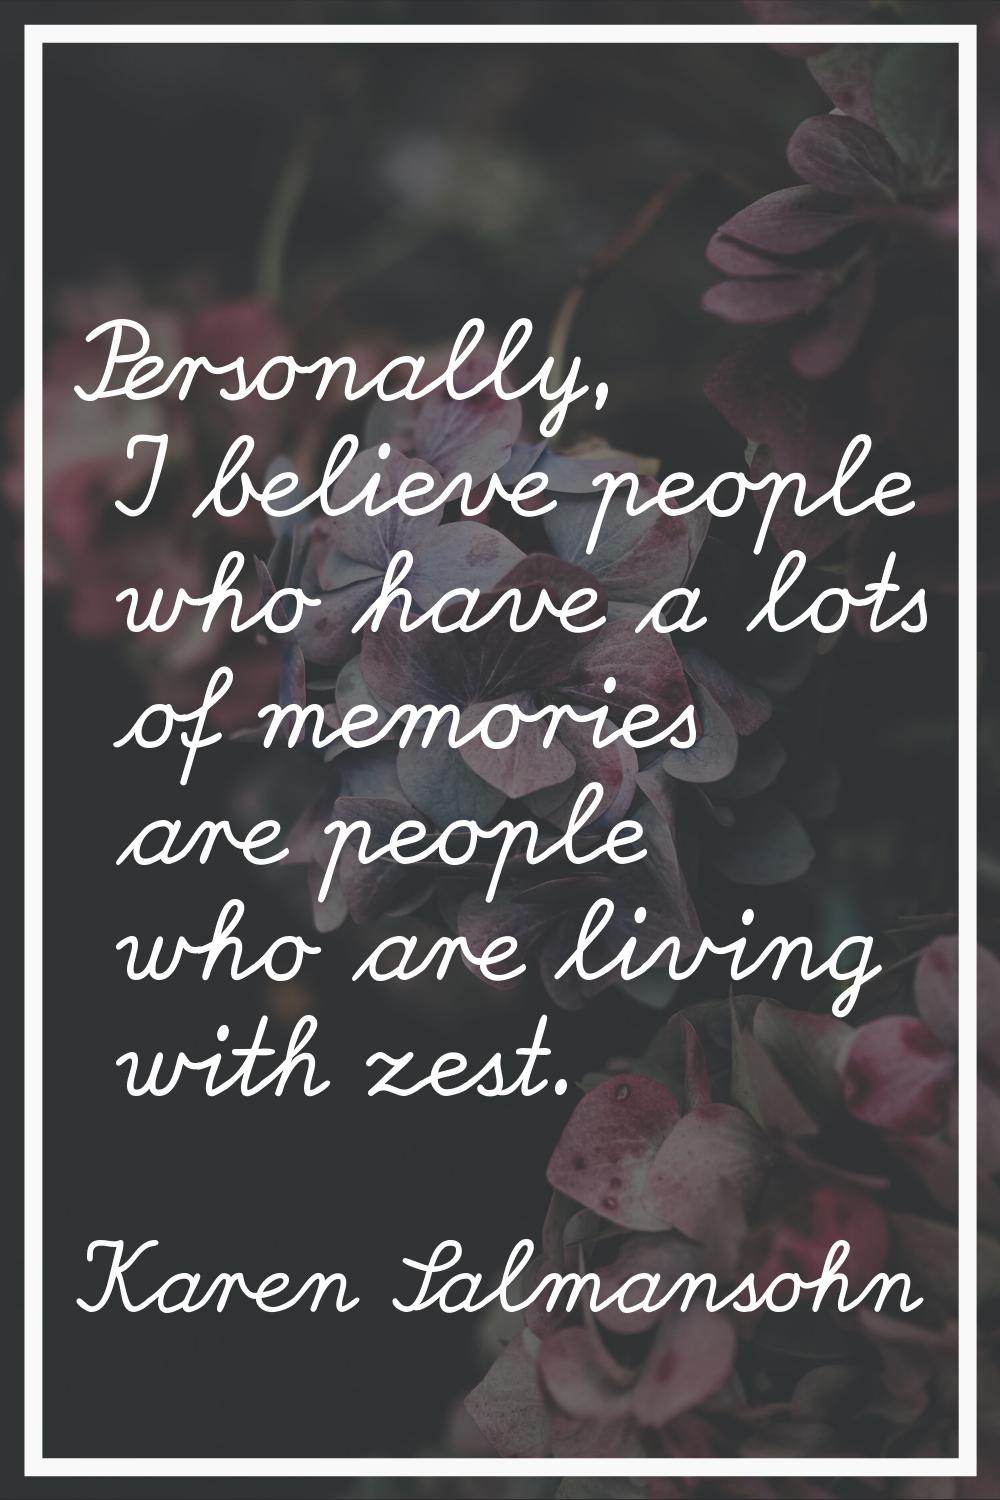 Personally, I believe people who have a lots of memories are people who are living with zest.